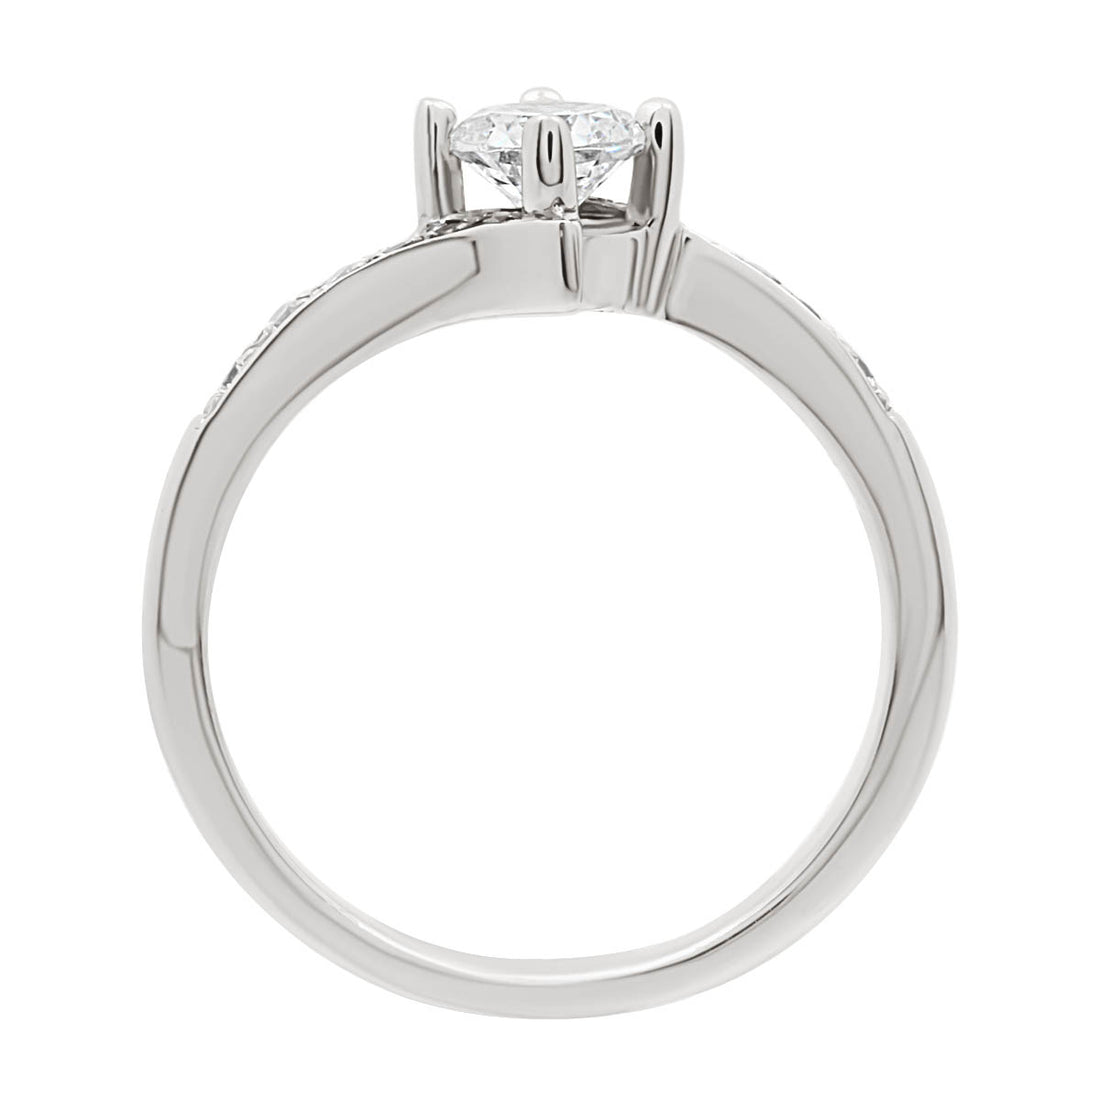 Quirky Diamond Engagement Ring in white gold in an upstanding position